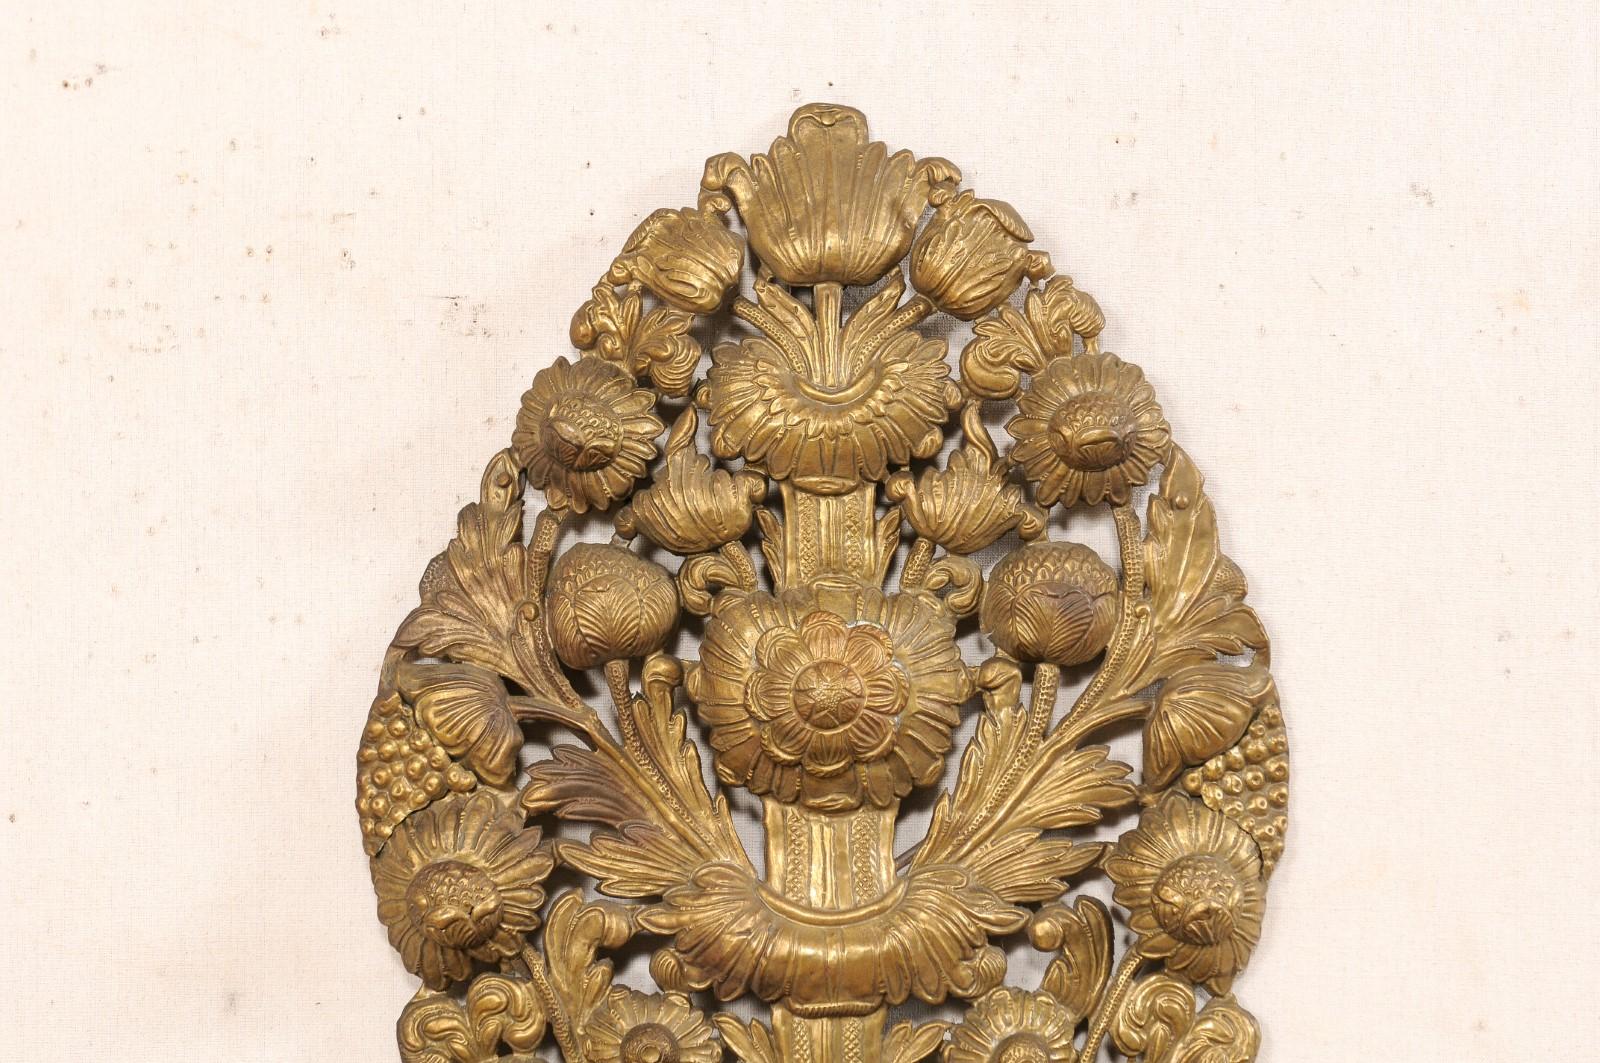 Late 18th C. Pair of French Brass Repoussé Wall Sconces, 35.25